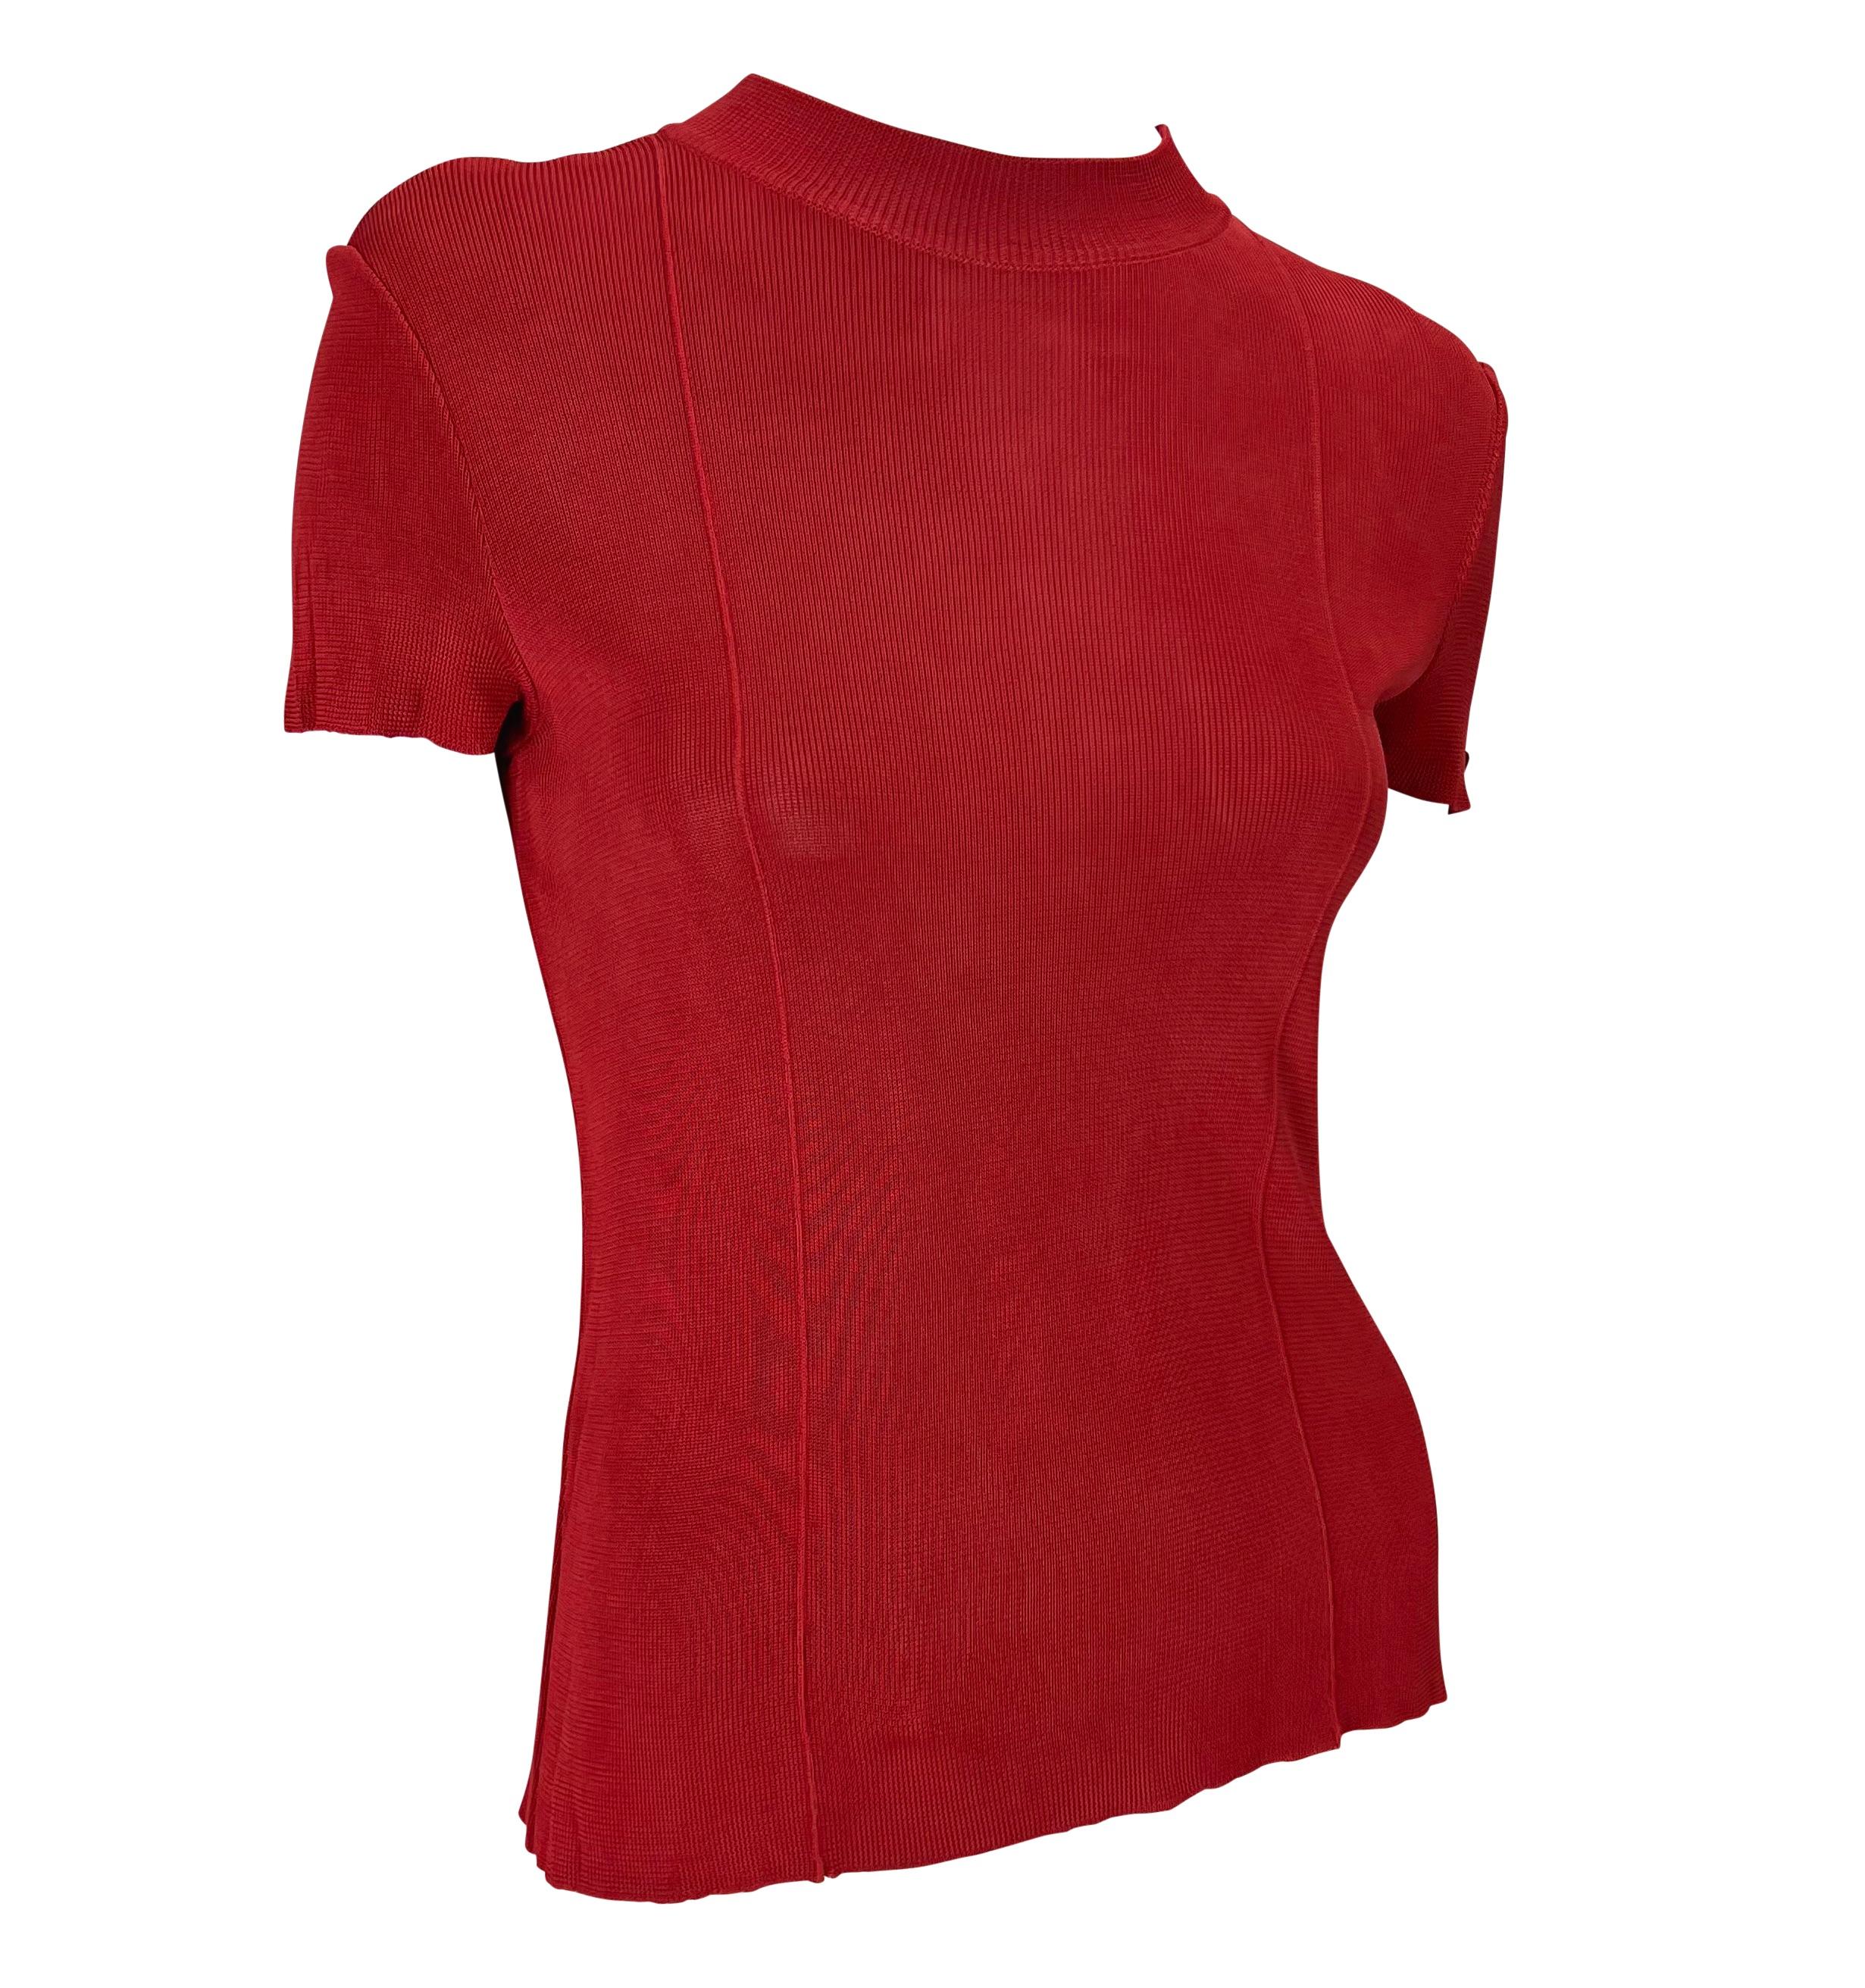 Women's S/S 1997 Gucci by Tom Ford Red G Logo Medallion Viscose Stretch Knit Top For Sale